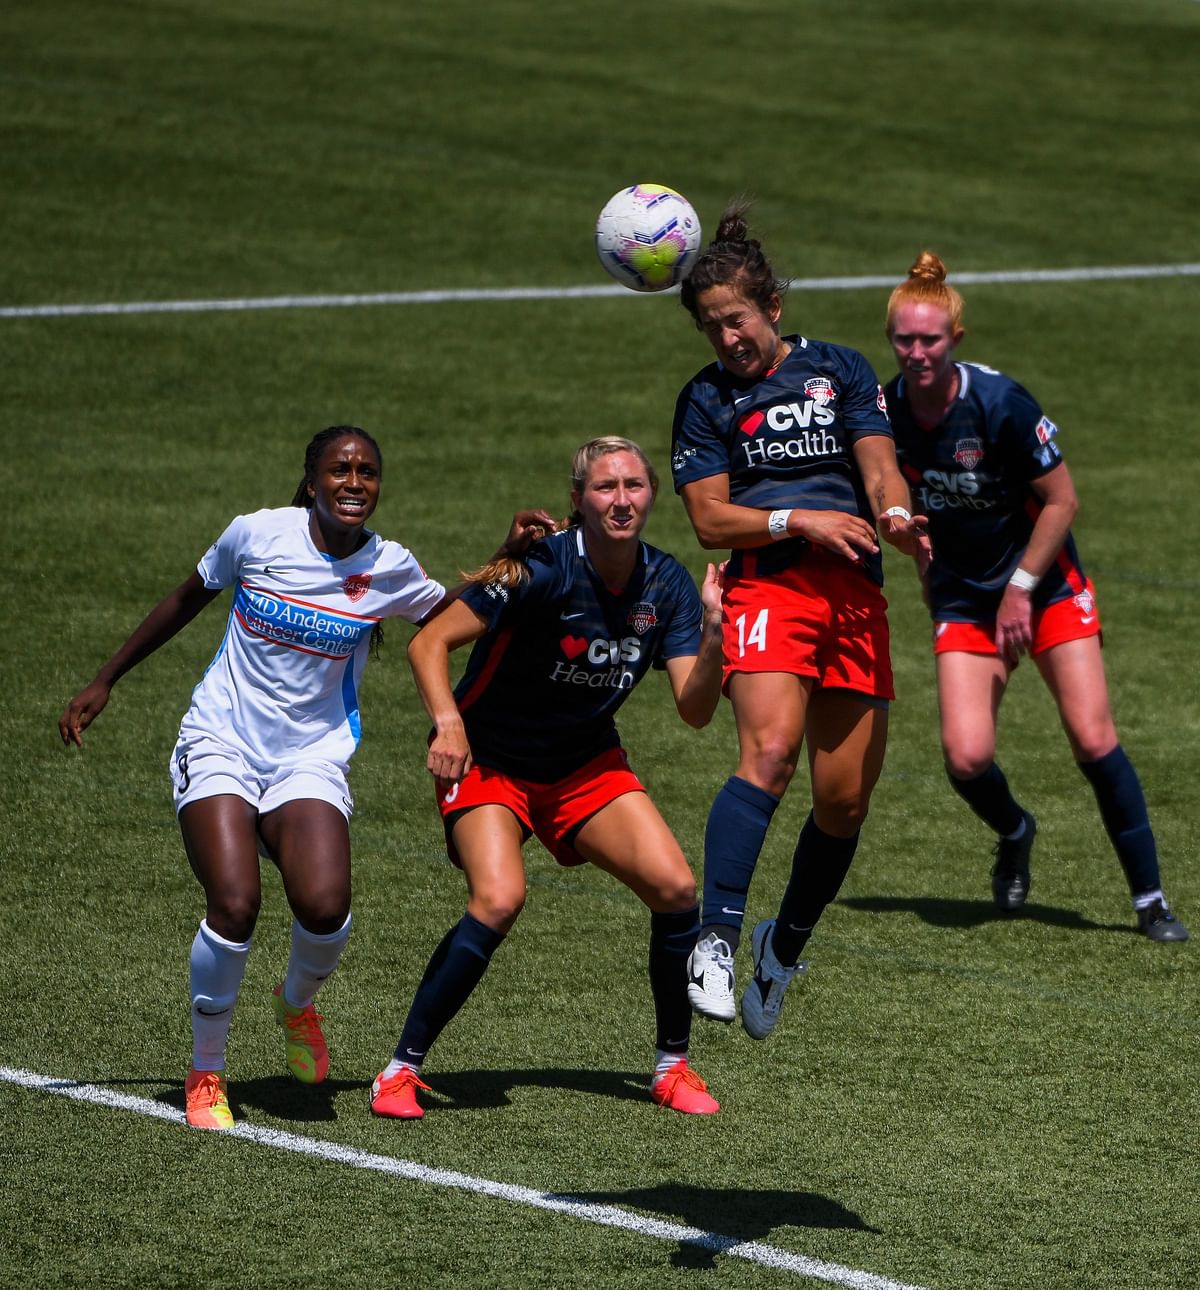 Paige Nielsen #14 of Washington Spirit attempts a header during a game against the Houston Dash on day 7 of the NWSL Challenge Cup at Zions Bank Stadium on July 12, 2020 in Herriman, Utah. Credit: Getty Images/AFP